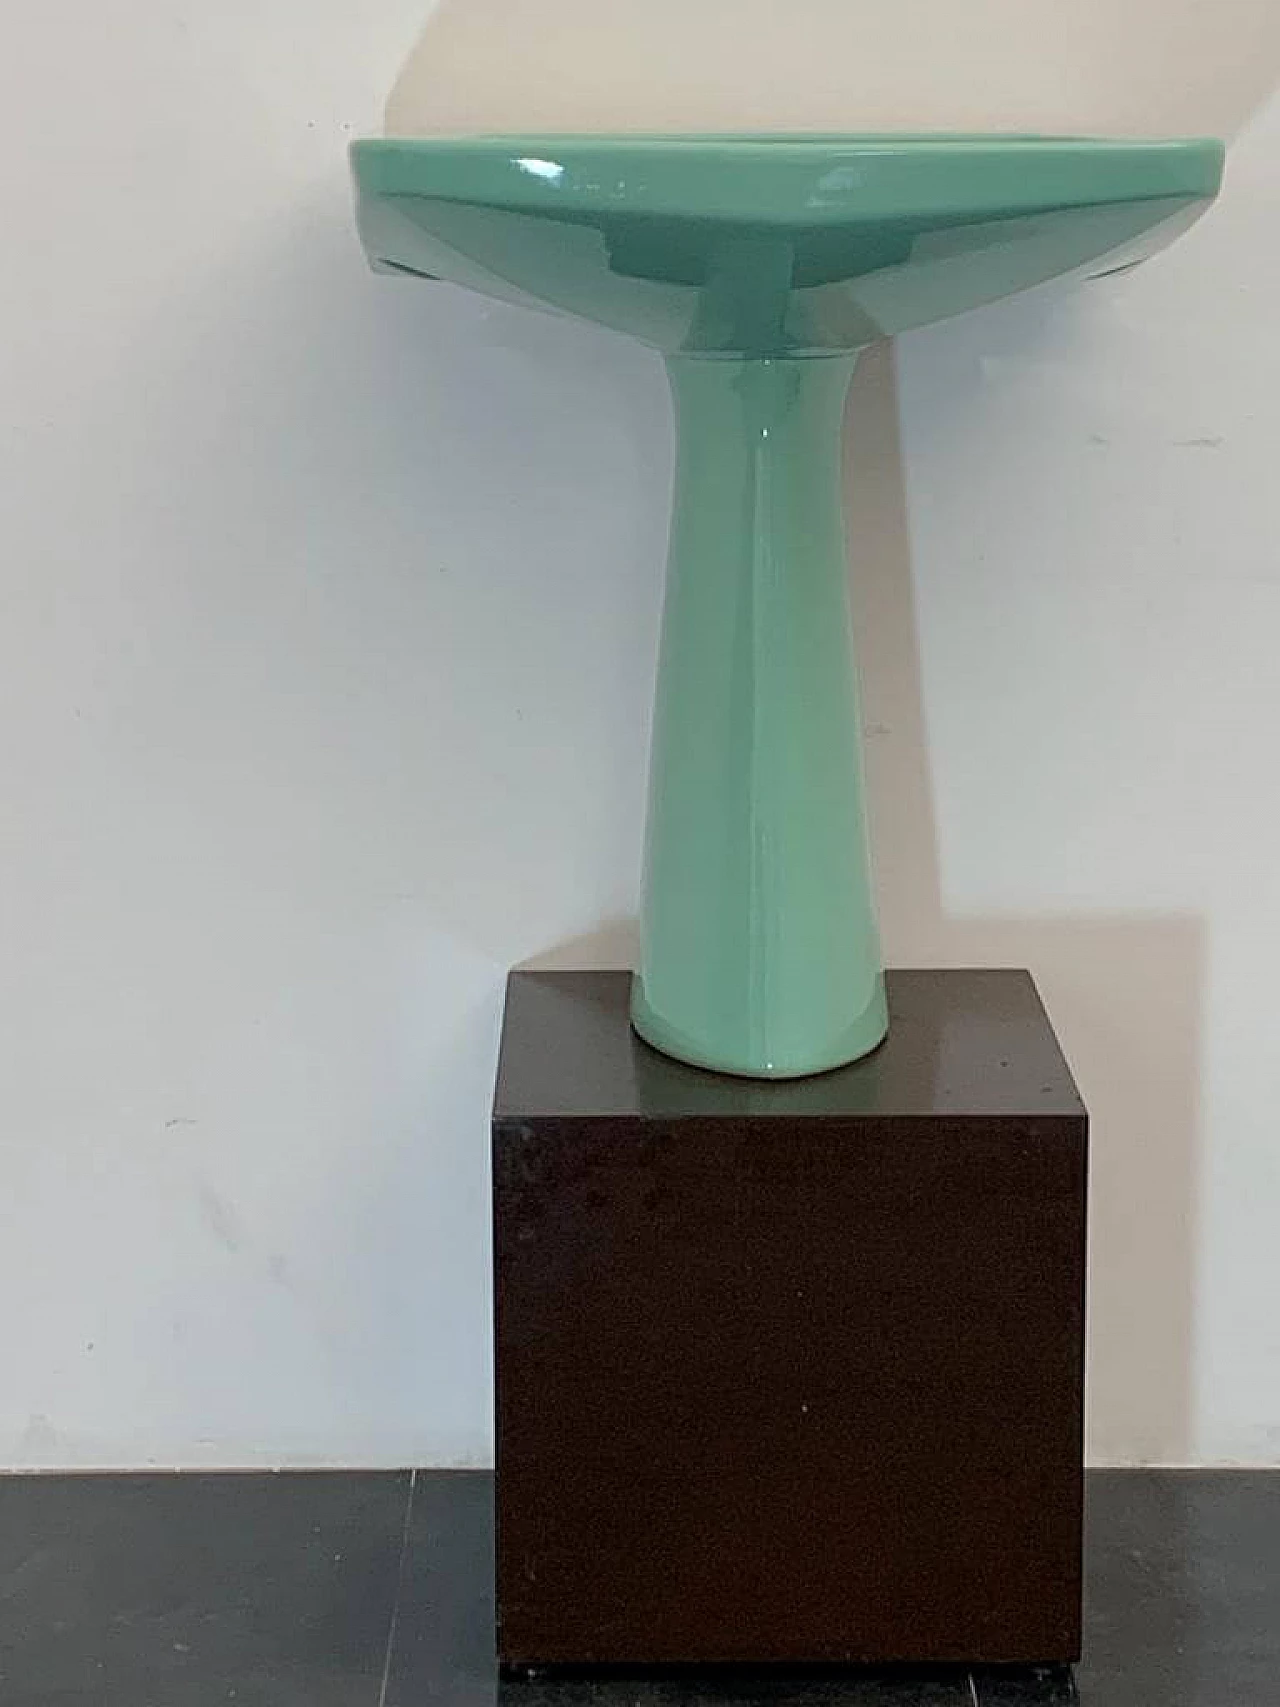 Sea green Oneline washbasin by Gio Ponti for Ideal Standard, 1950s 8